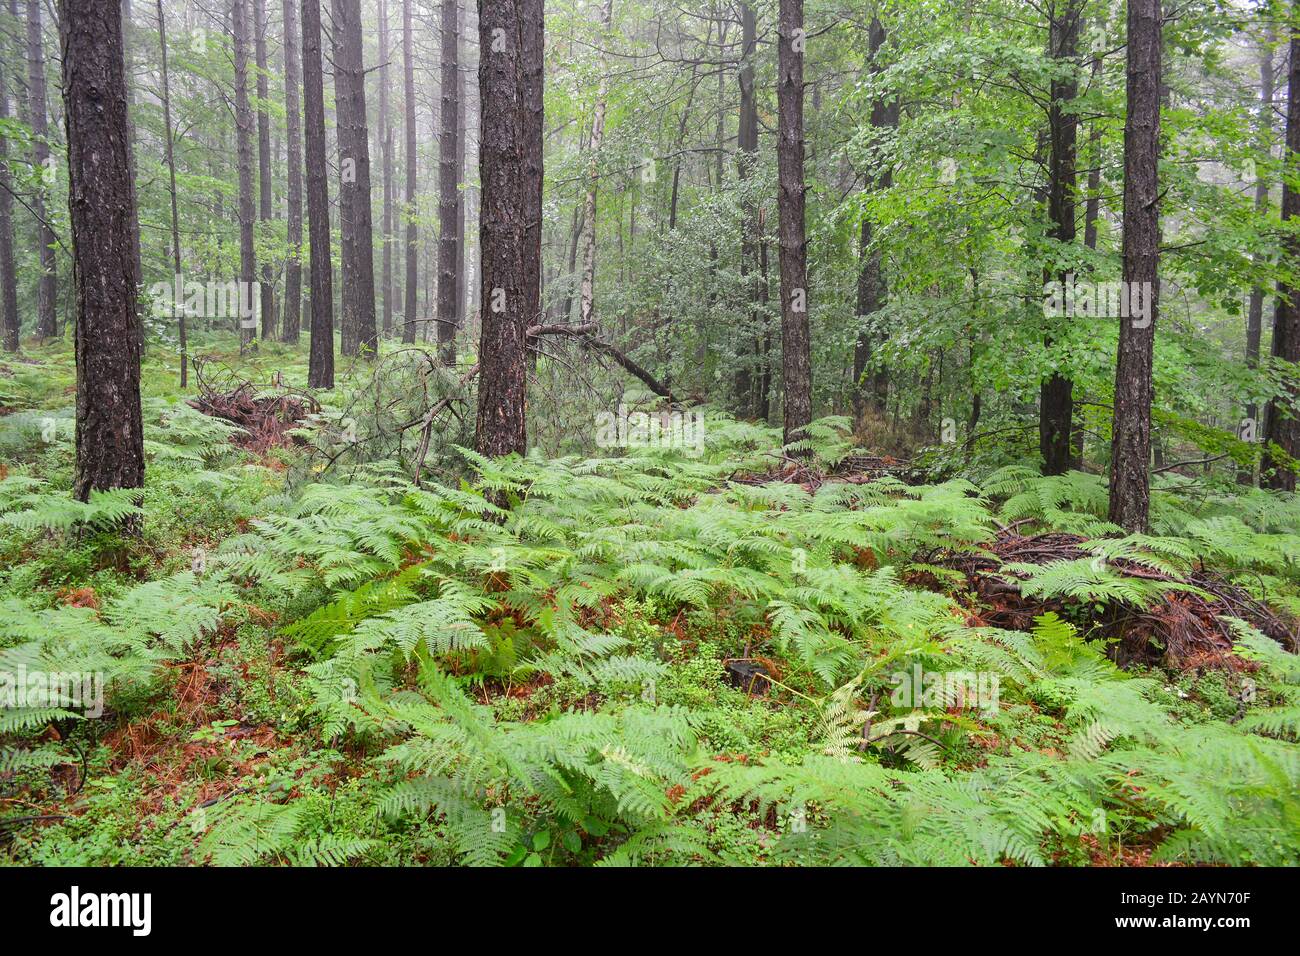 Black pine forest with a very few decidious trees and lot of green fern in foreground, wet vegetation  in early summer rain, Jelova gora, Serbia Stock Photo